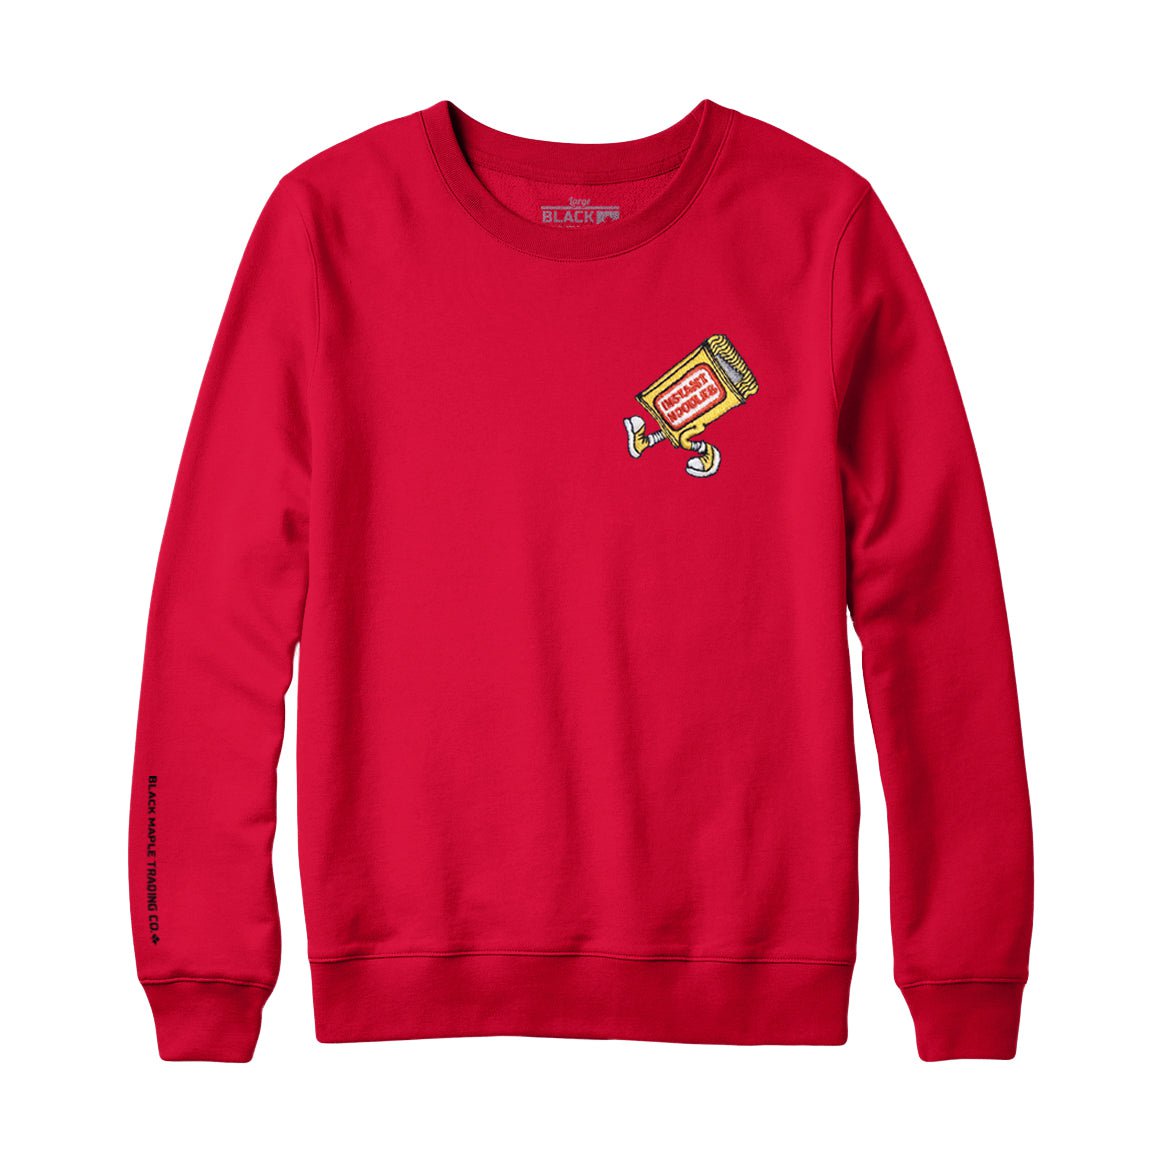 The Best Instant Noodles Embroidered Sweatshirt and Hoodie